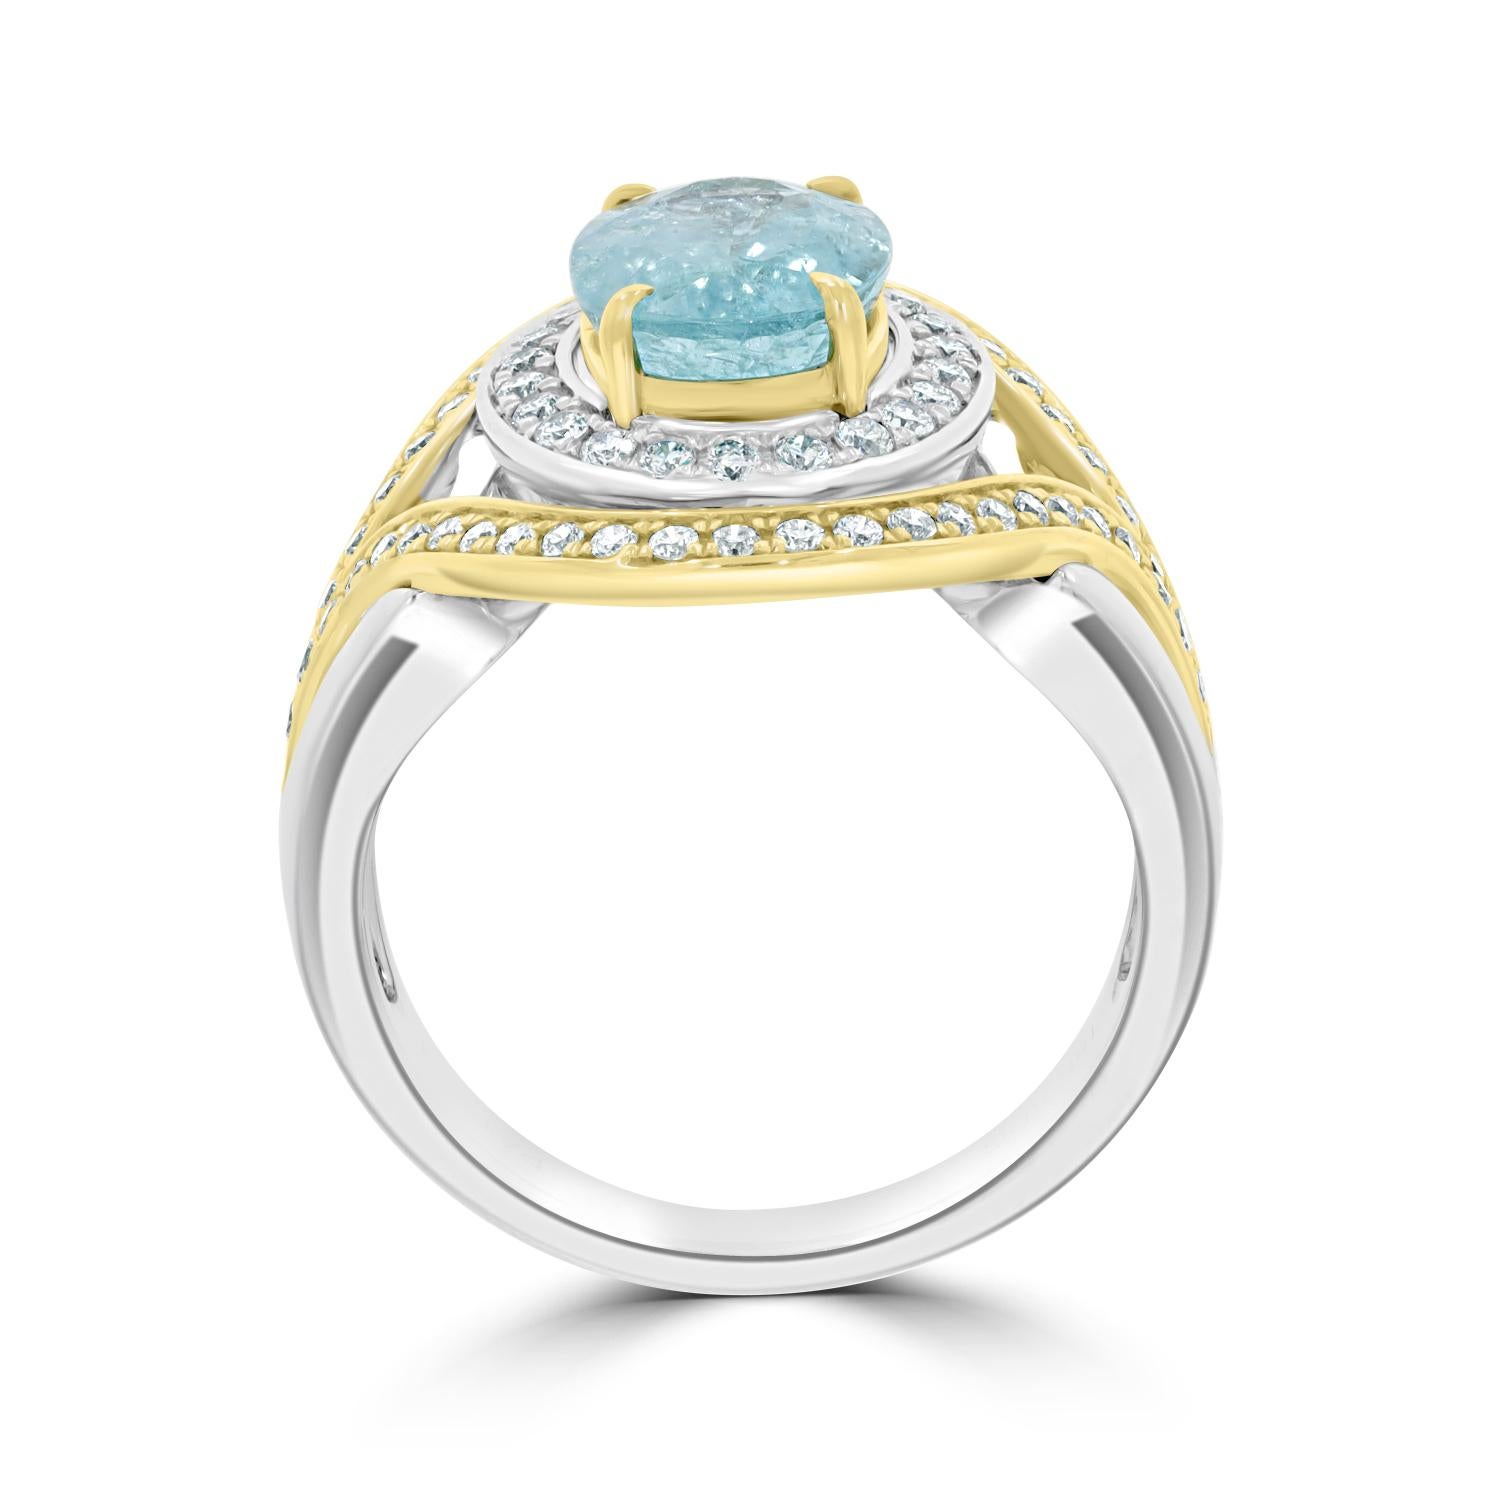 A bright oval cut Paraiba, offset by gorgeous round diamonds makes this fascinating ring a worthy investment. Crafted in 18K two tone gold, its radiance can be seen from a distance, attracting attention. A fantastic fusion of latest trends and